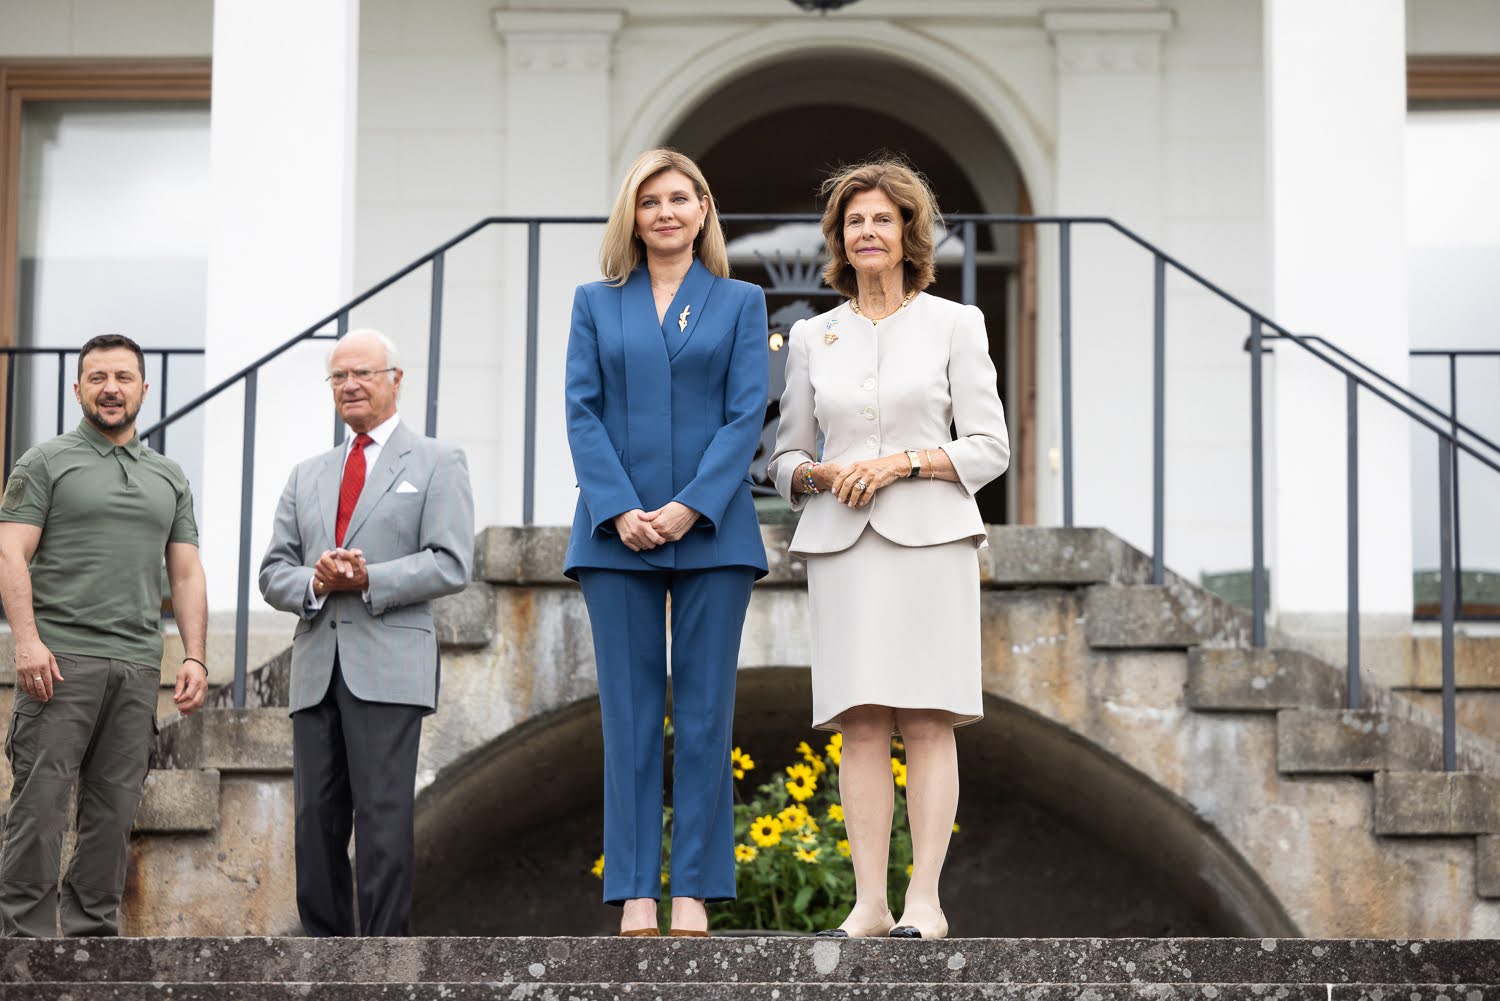 King Carl Gustaf and Queen Silvia took a personal interest in funding the restoration of Zmiivka village's infrastructure, formerly known as Gammalsvenskby, an ancient Swedish settlement.